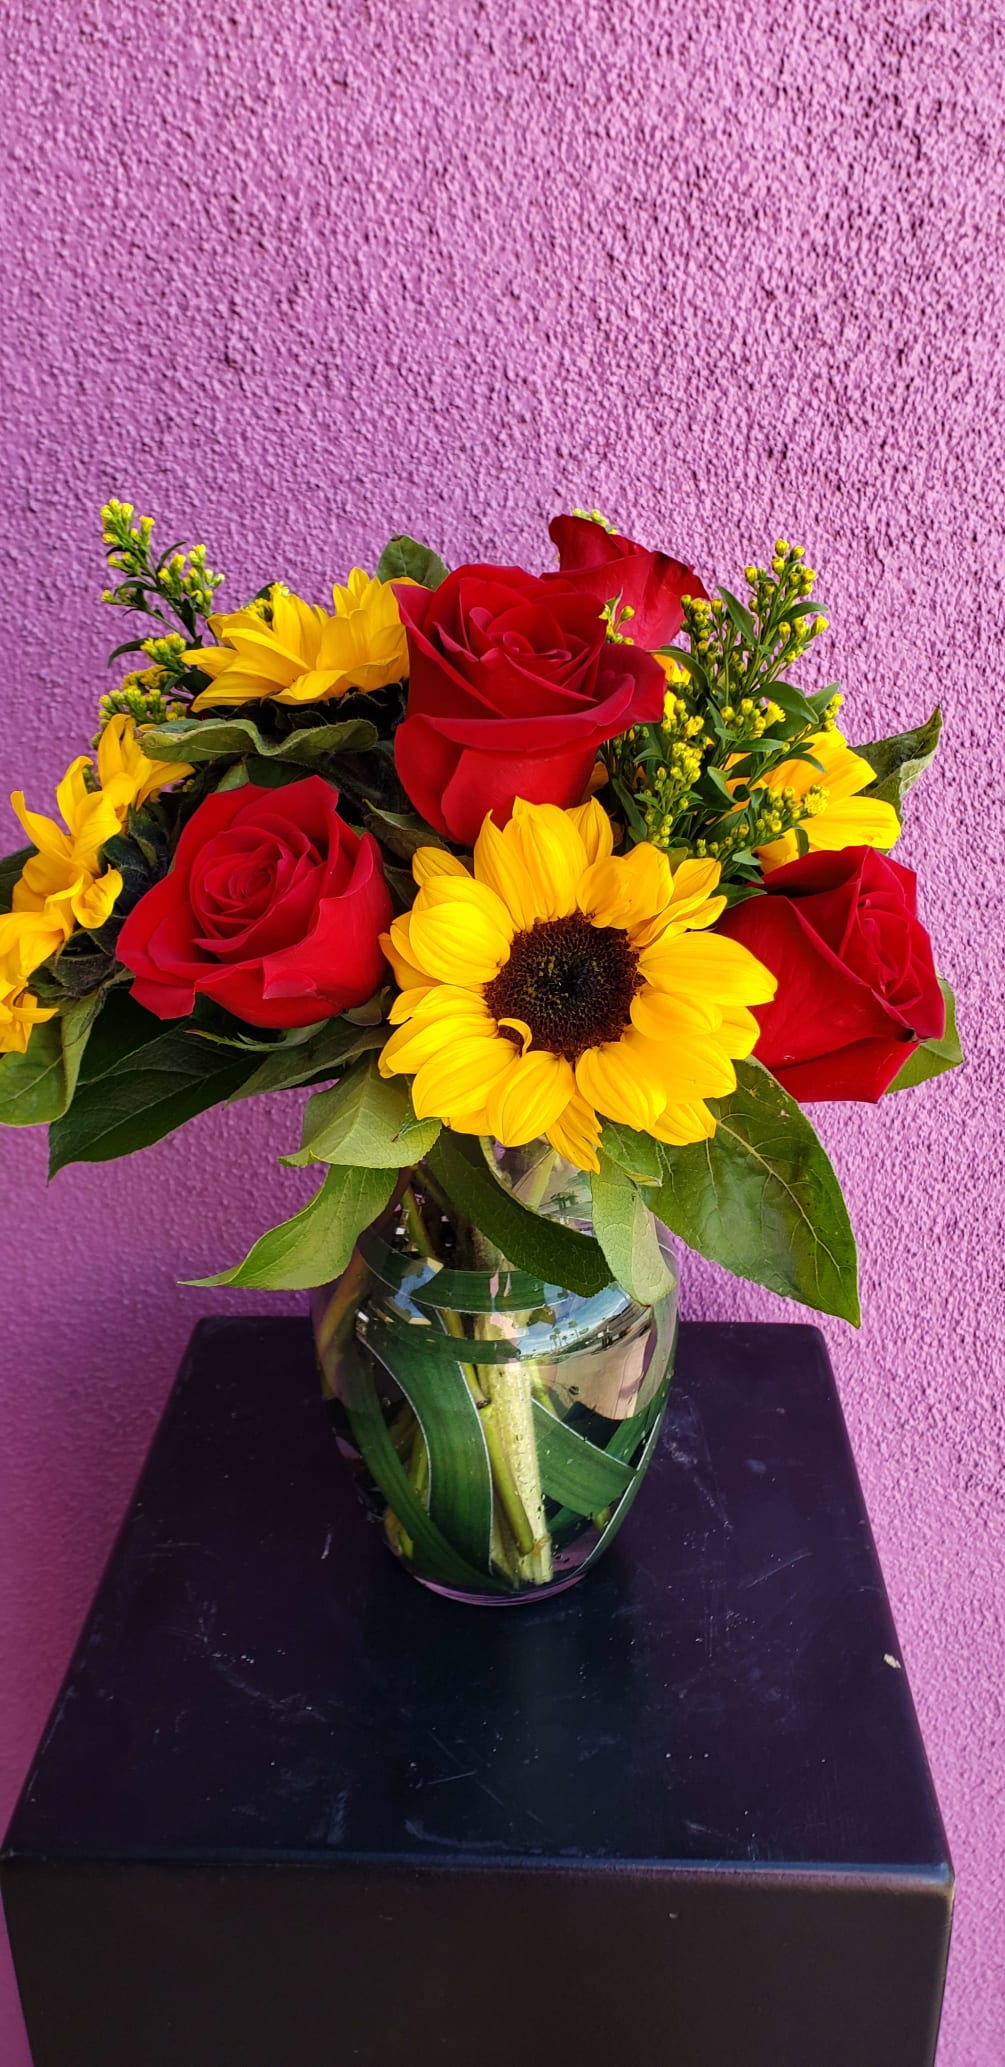 Half a dozen red roses and sunflowers